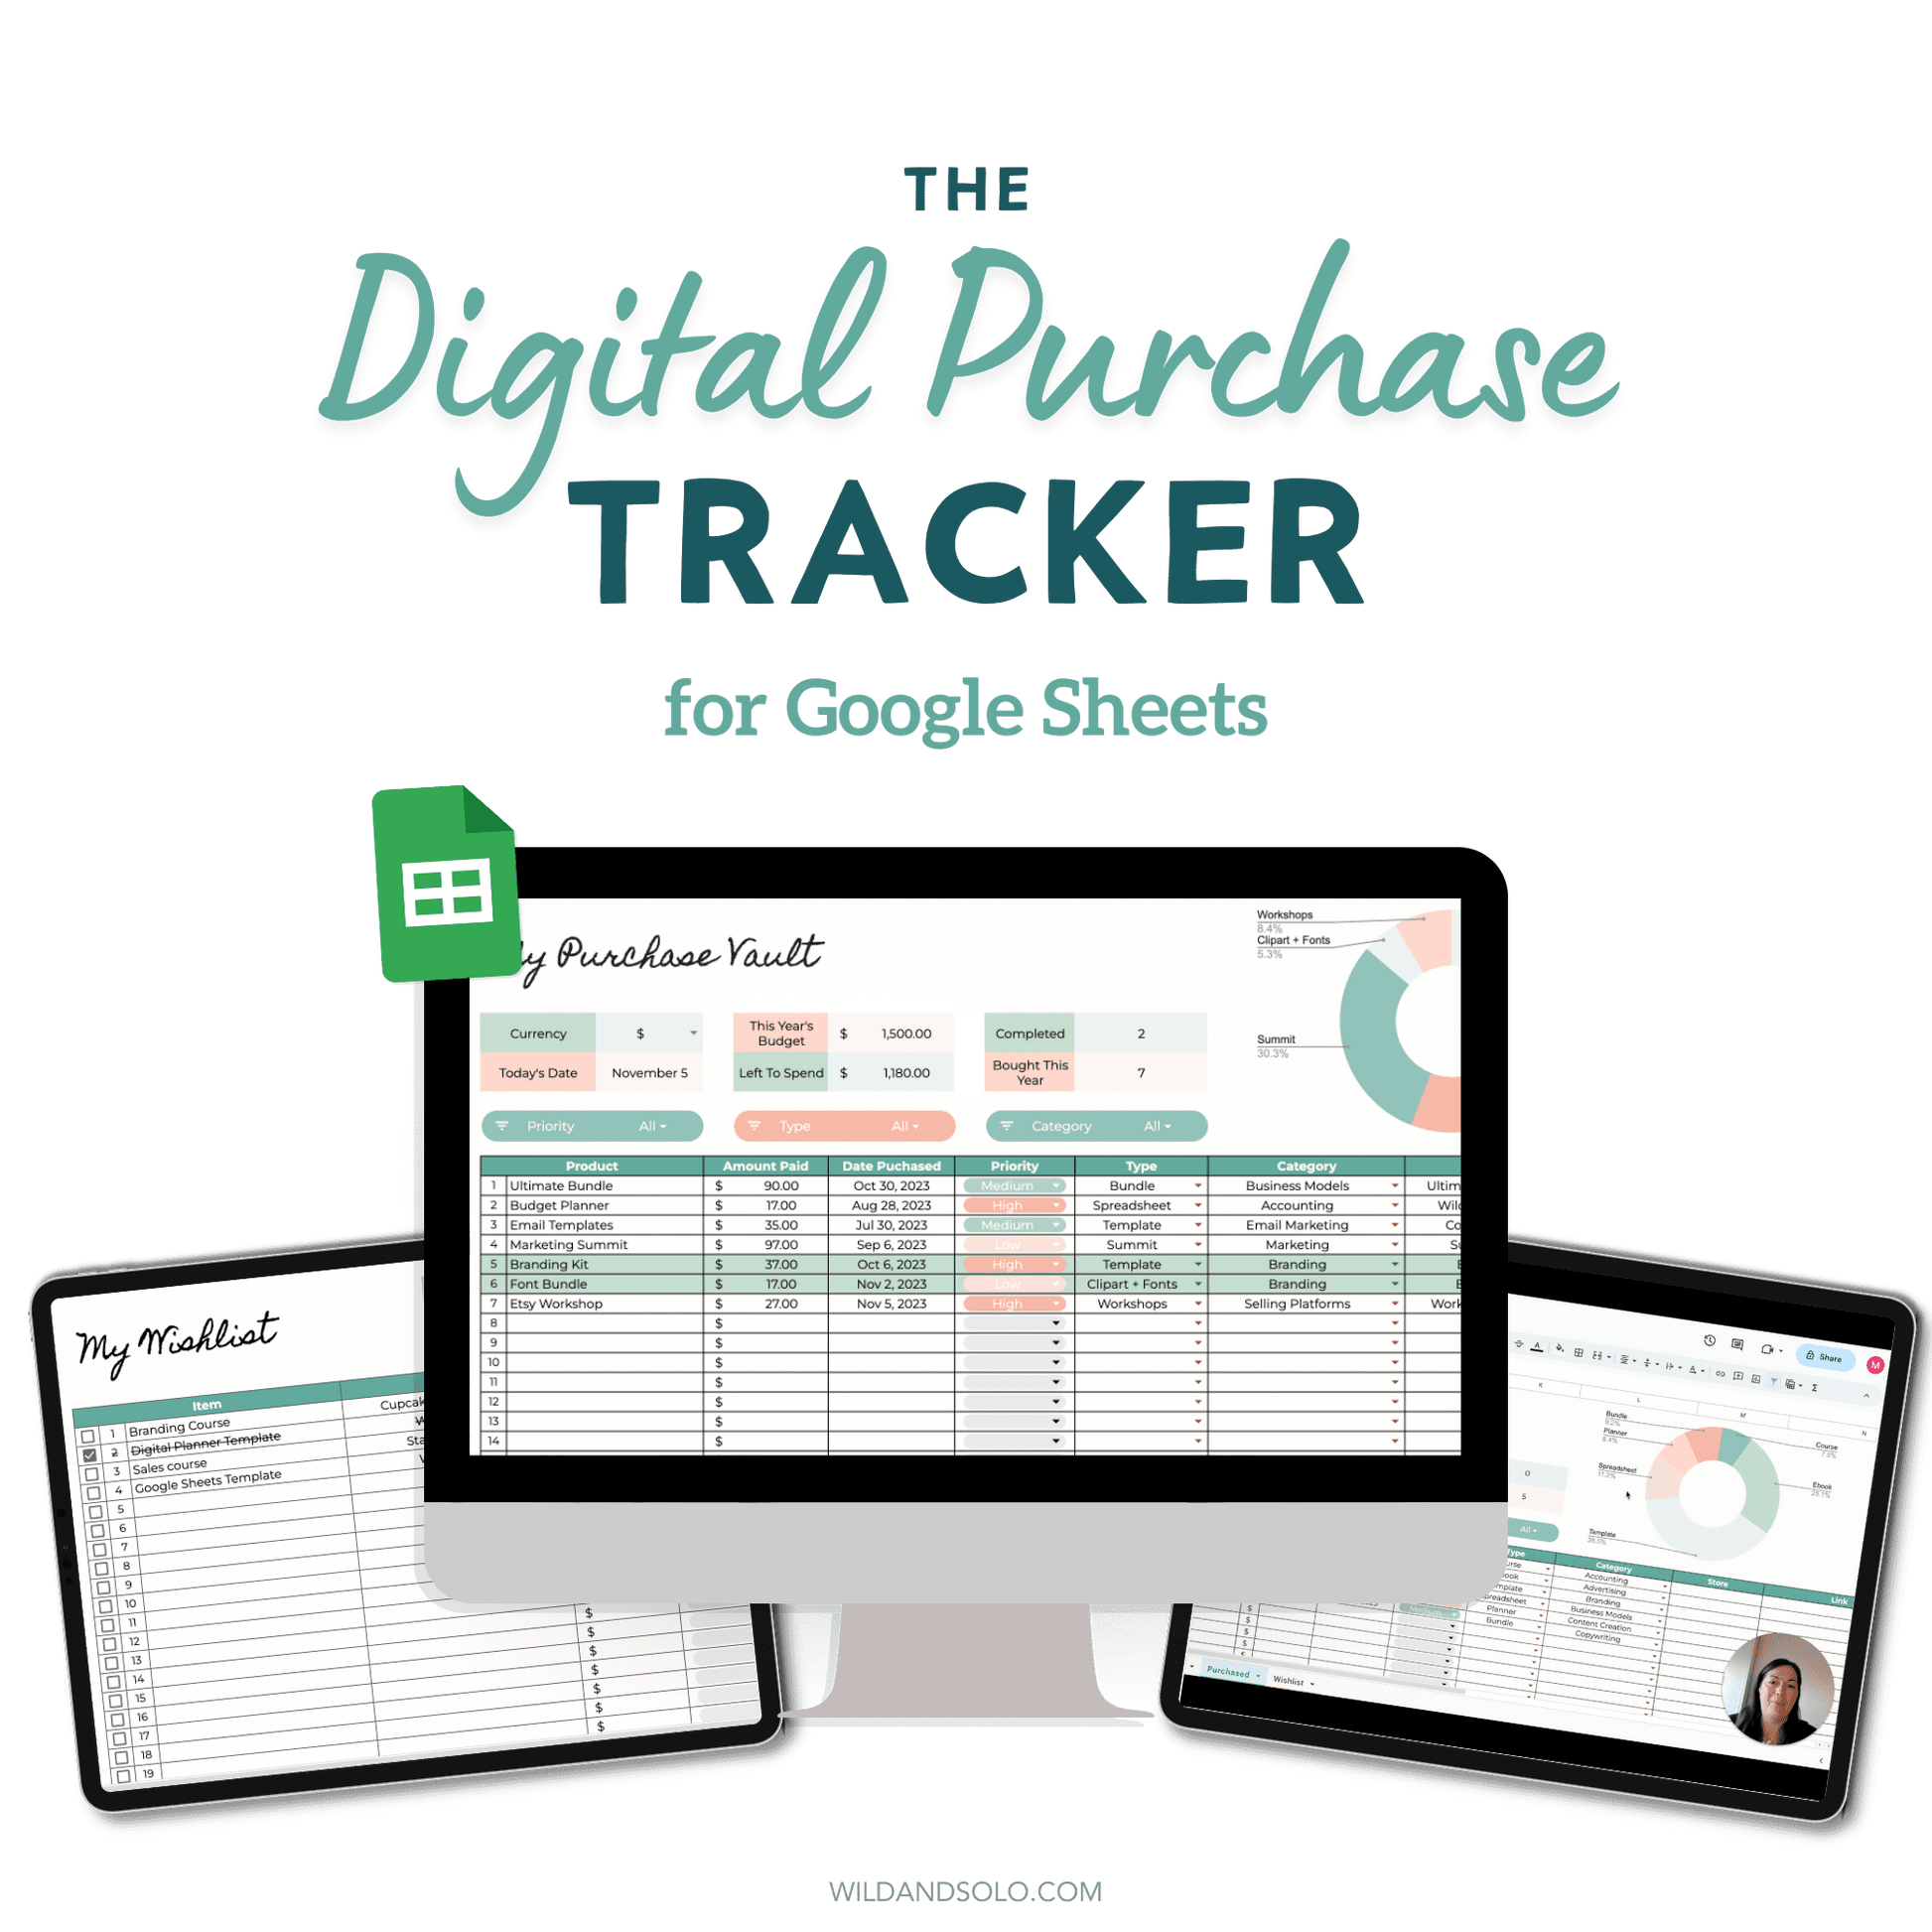 Digital Purchase Tracker Spreadsheet for Google Sheets shown on a computer